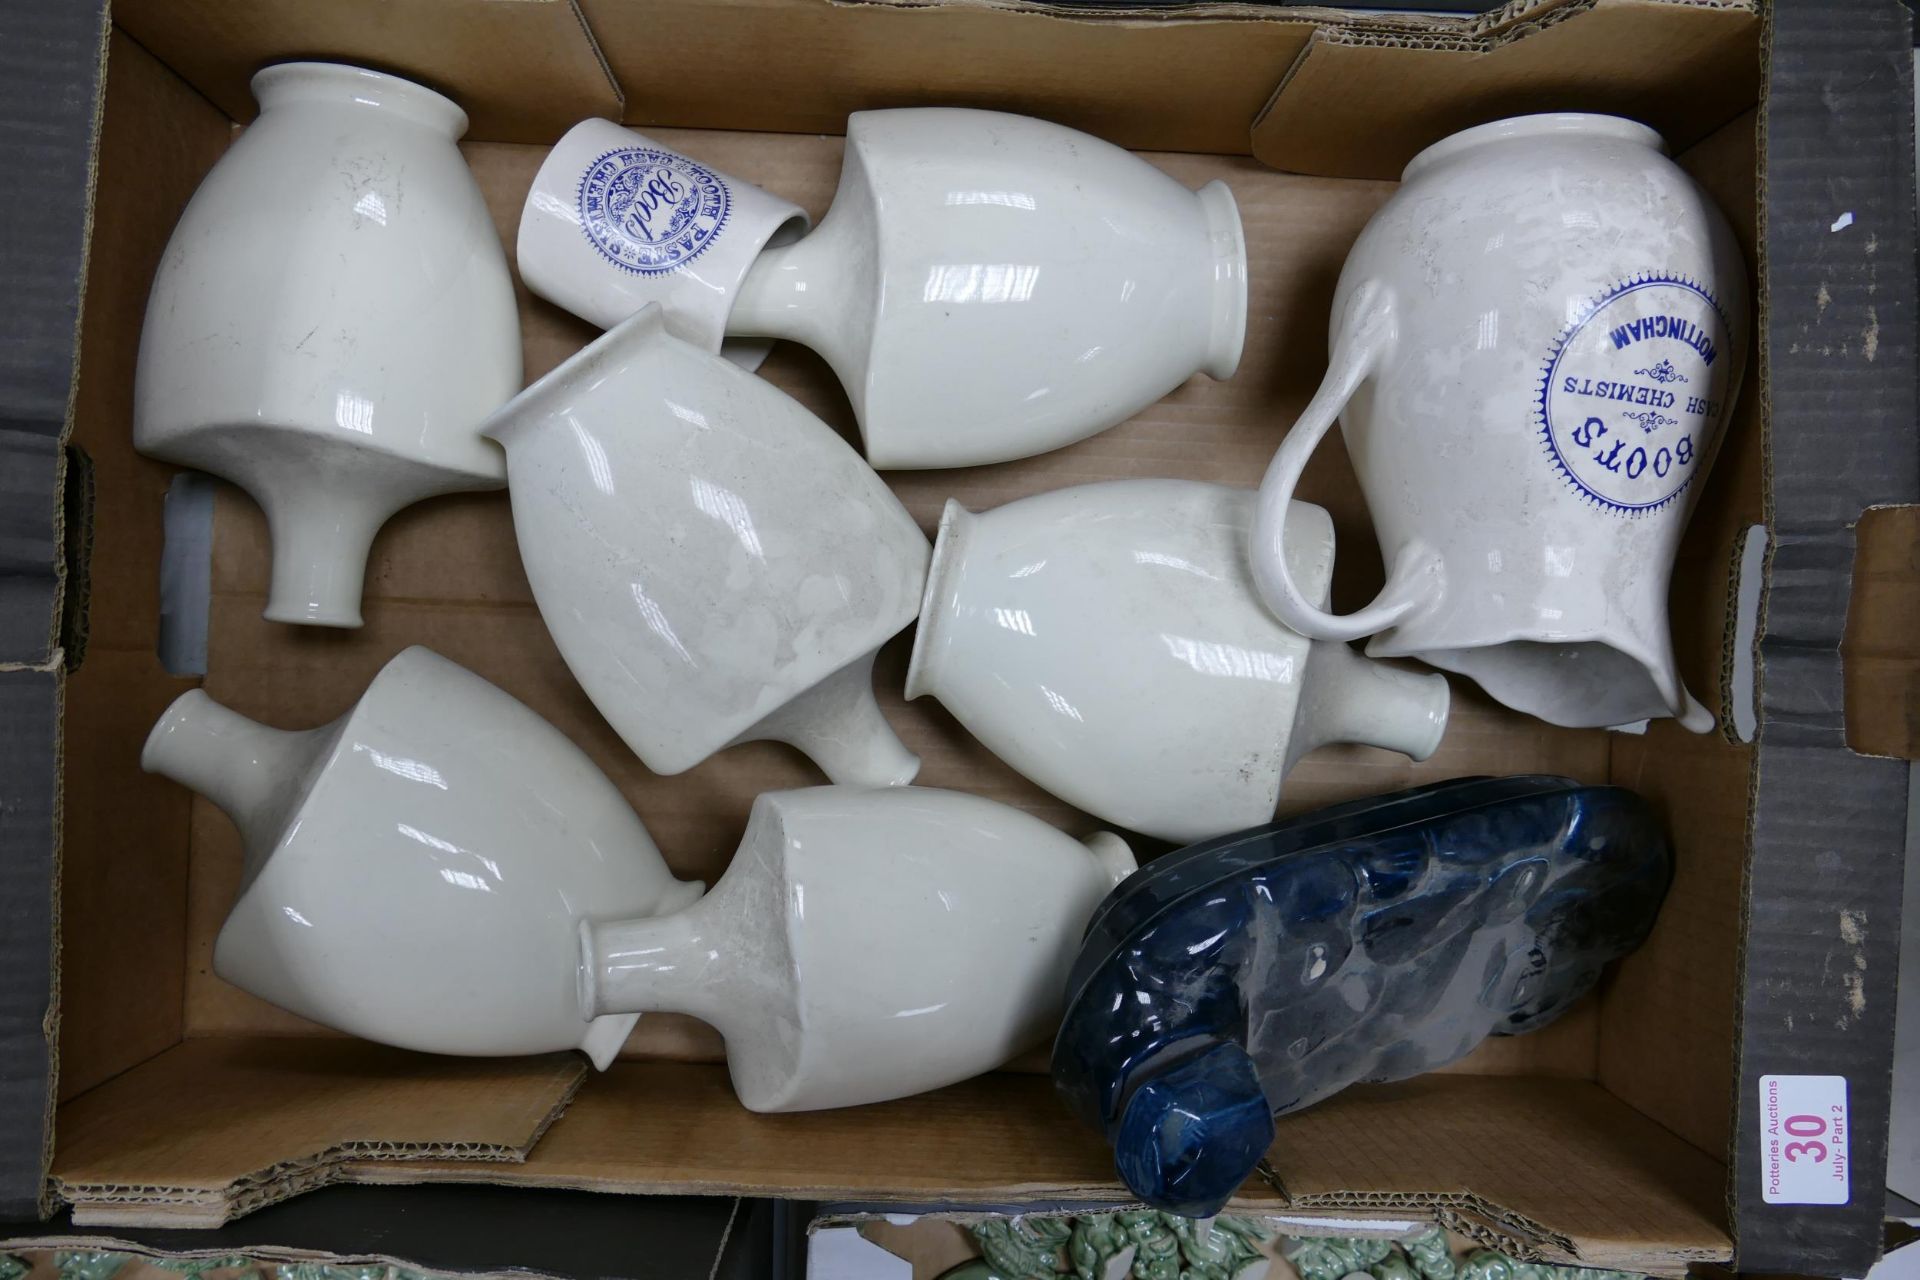 A collection of Wade Boots Chemist Adverting Jugs, Vases, Bed Warmer etc . These items were